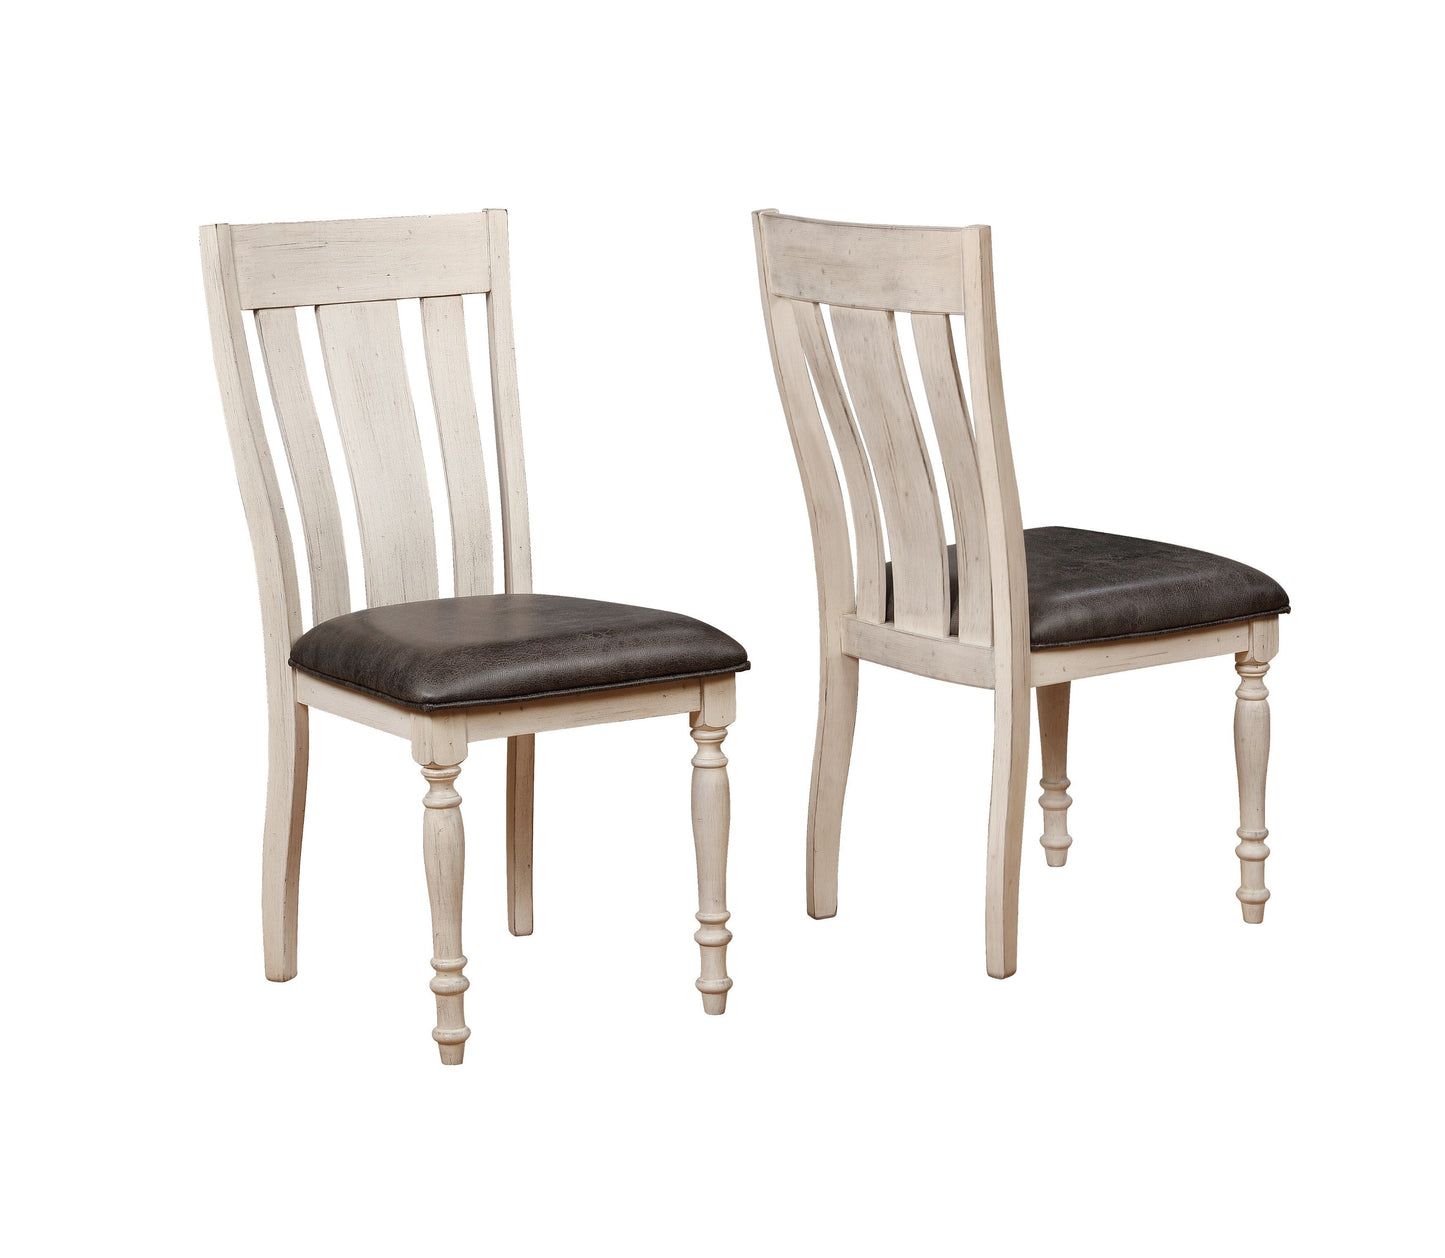 Arch Weathered Oak Turned Leg Dining Chair Set of 2